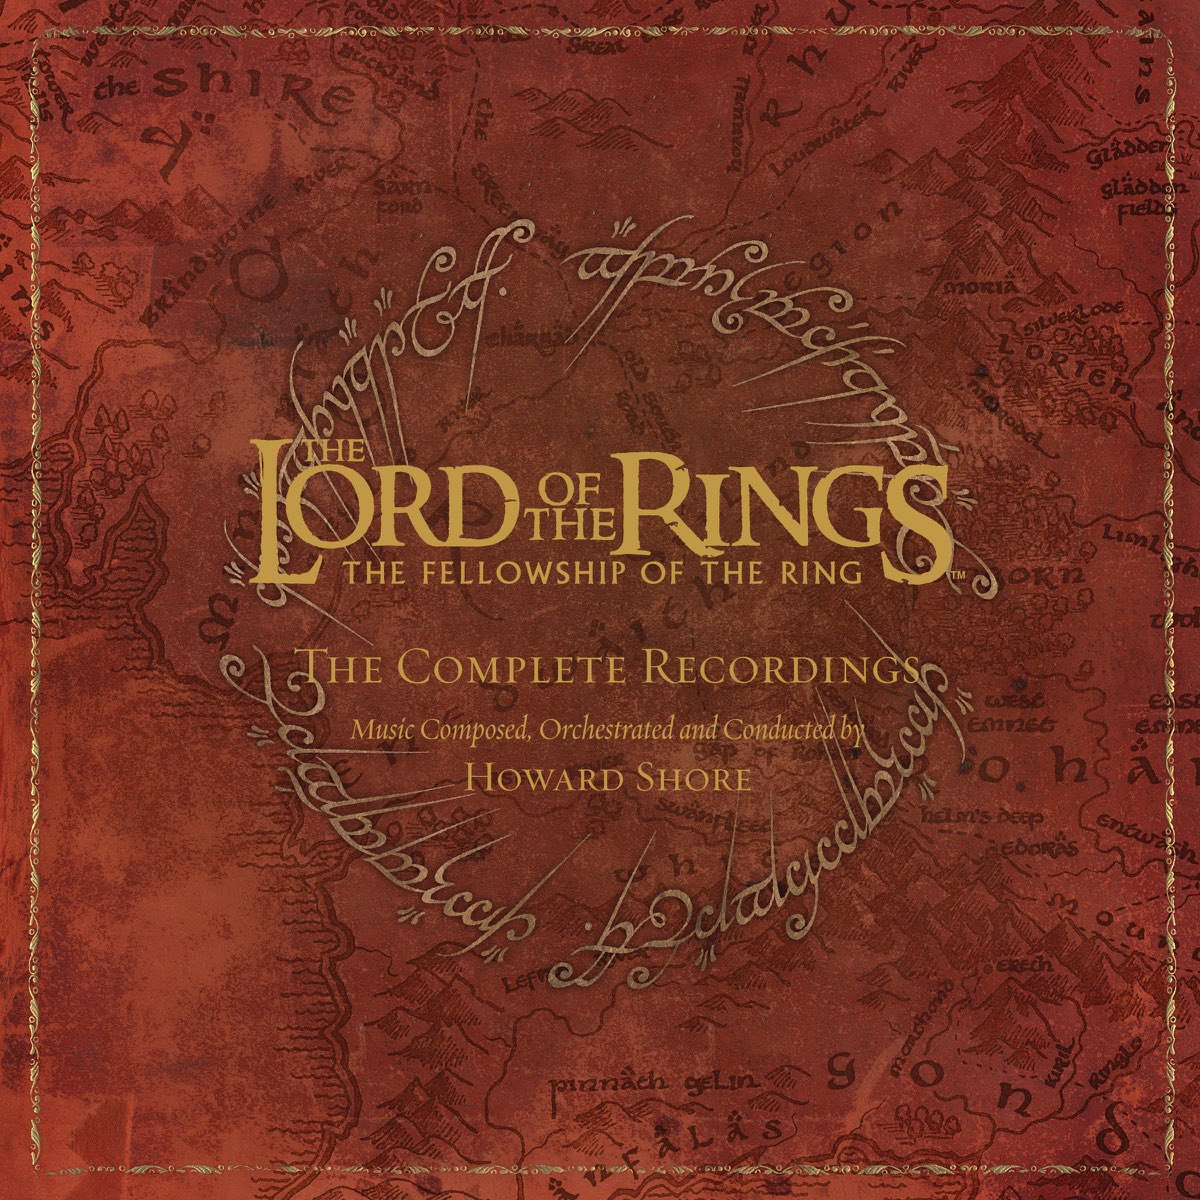 The Lord Of The Rings The Fellowship Of The Ring The Complete Recordings Album By Howard